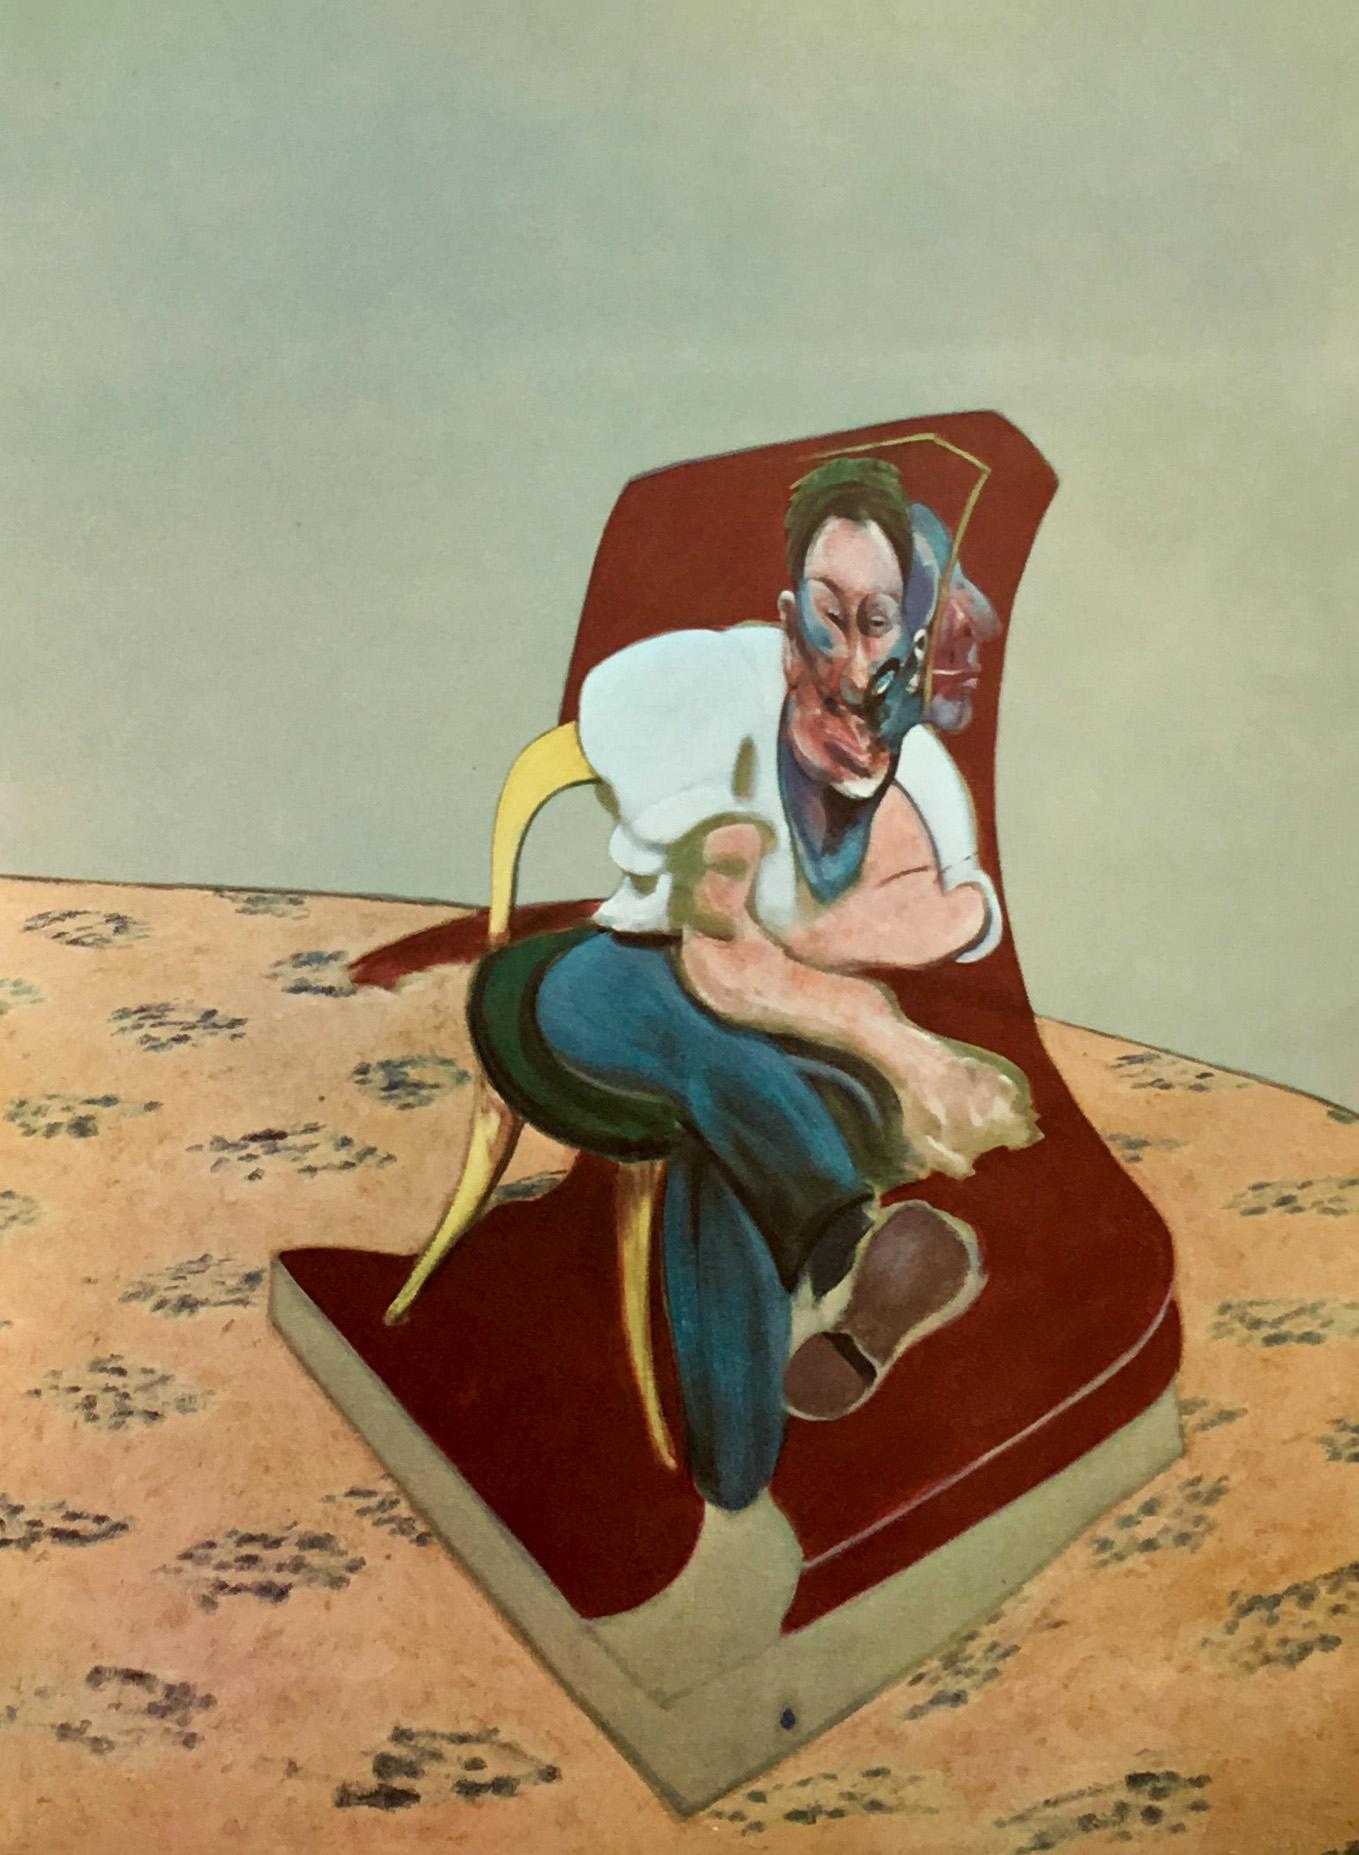 Francis Bacon Derriere Le Miroir lithograph (triptych): Three Studies for Portrait of Lucian Freud
Portfolio: Derriere Le Miroir, 1966
Published by: Galerie Maeght, Paris
Excellent frame piece. Superb overall quality. 

Medium: Lithograph in colors